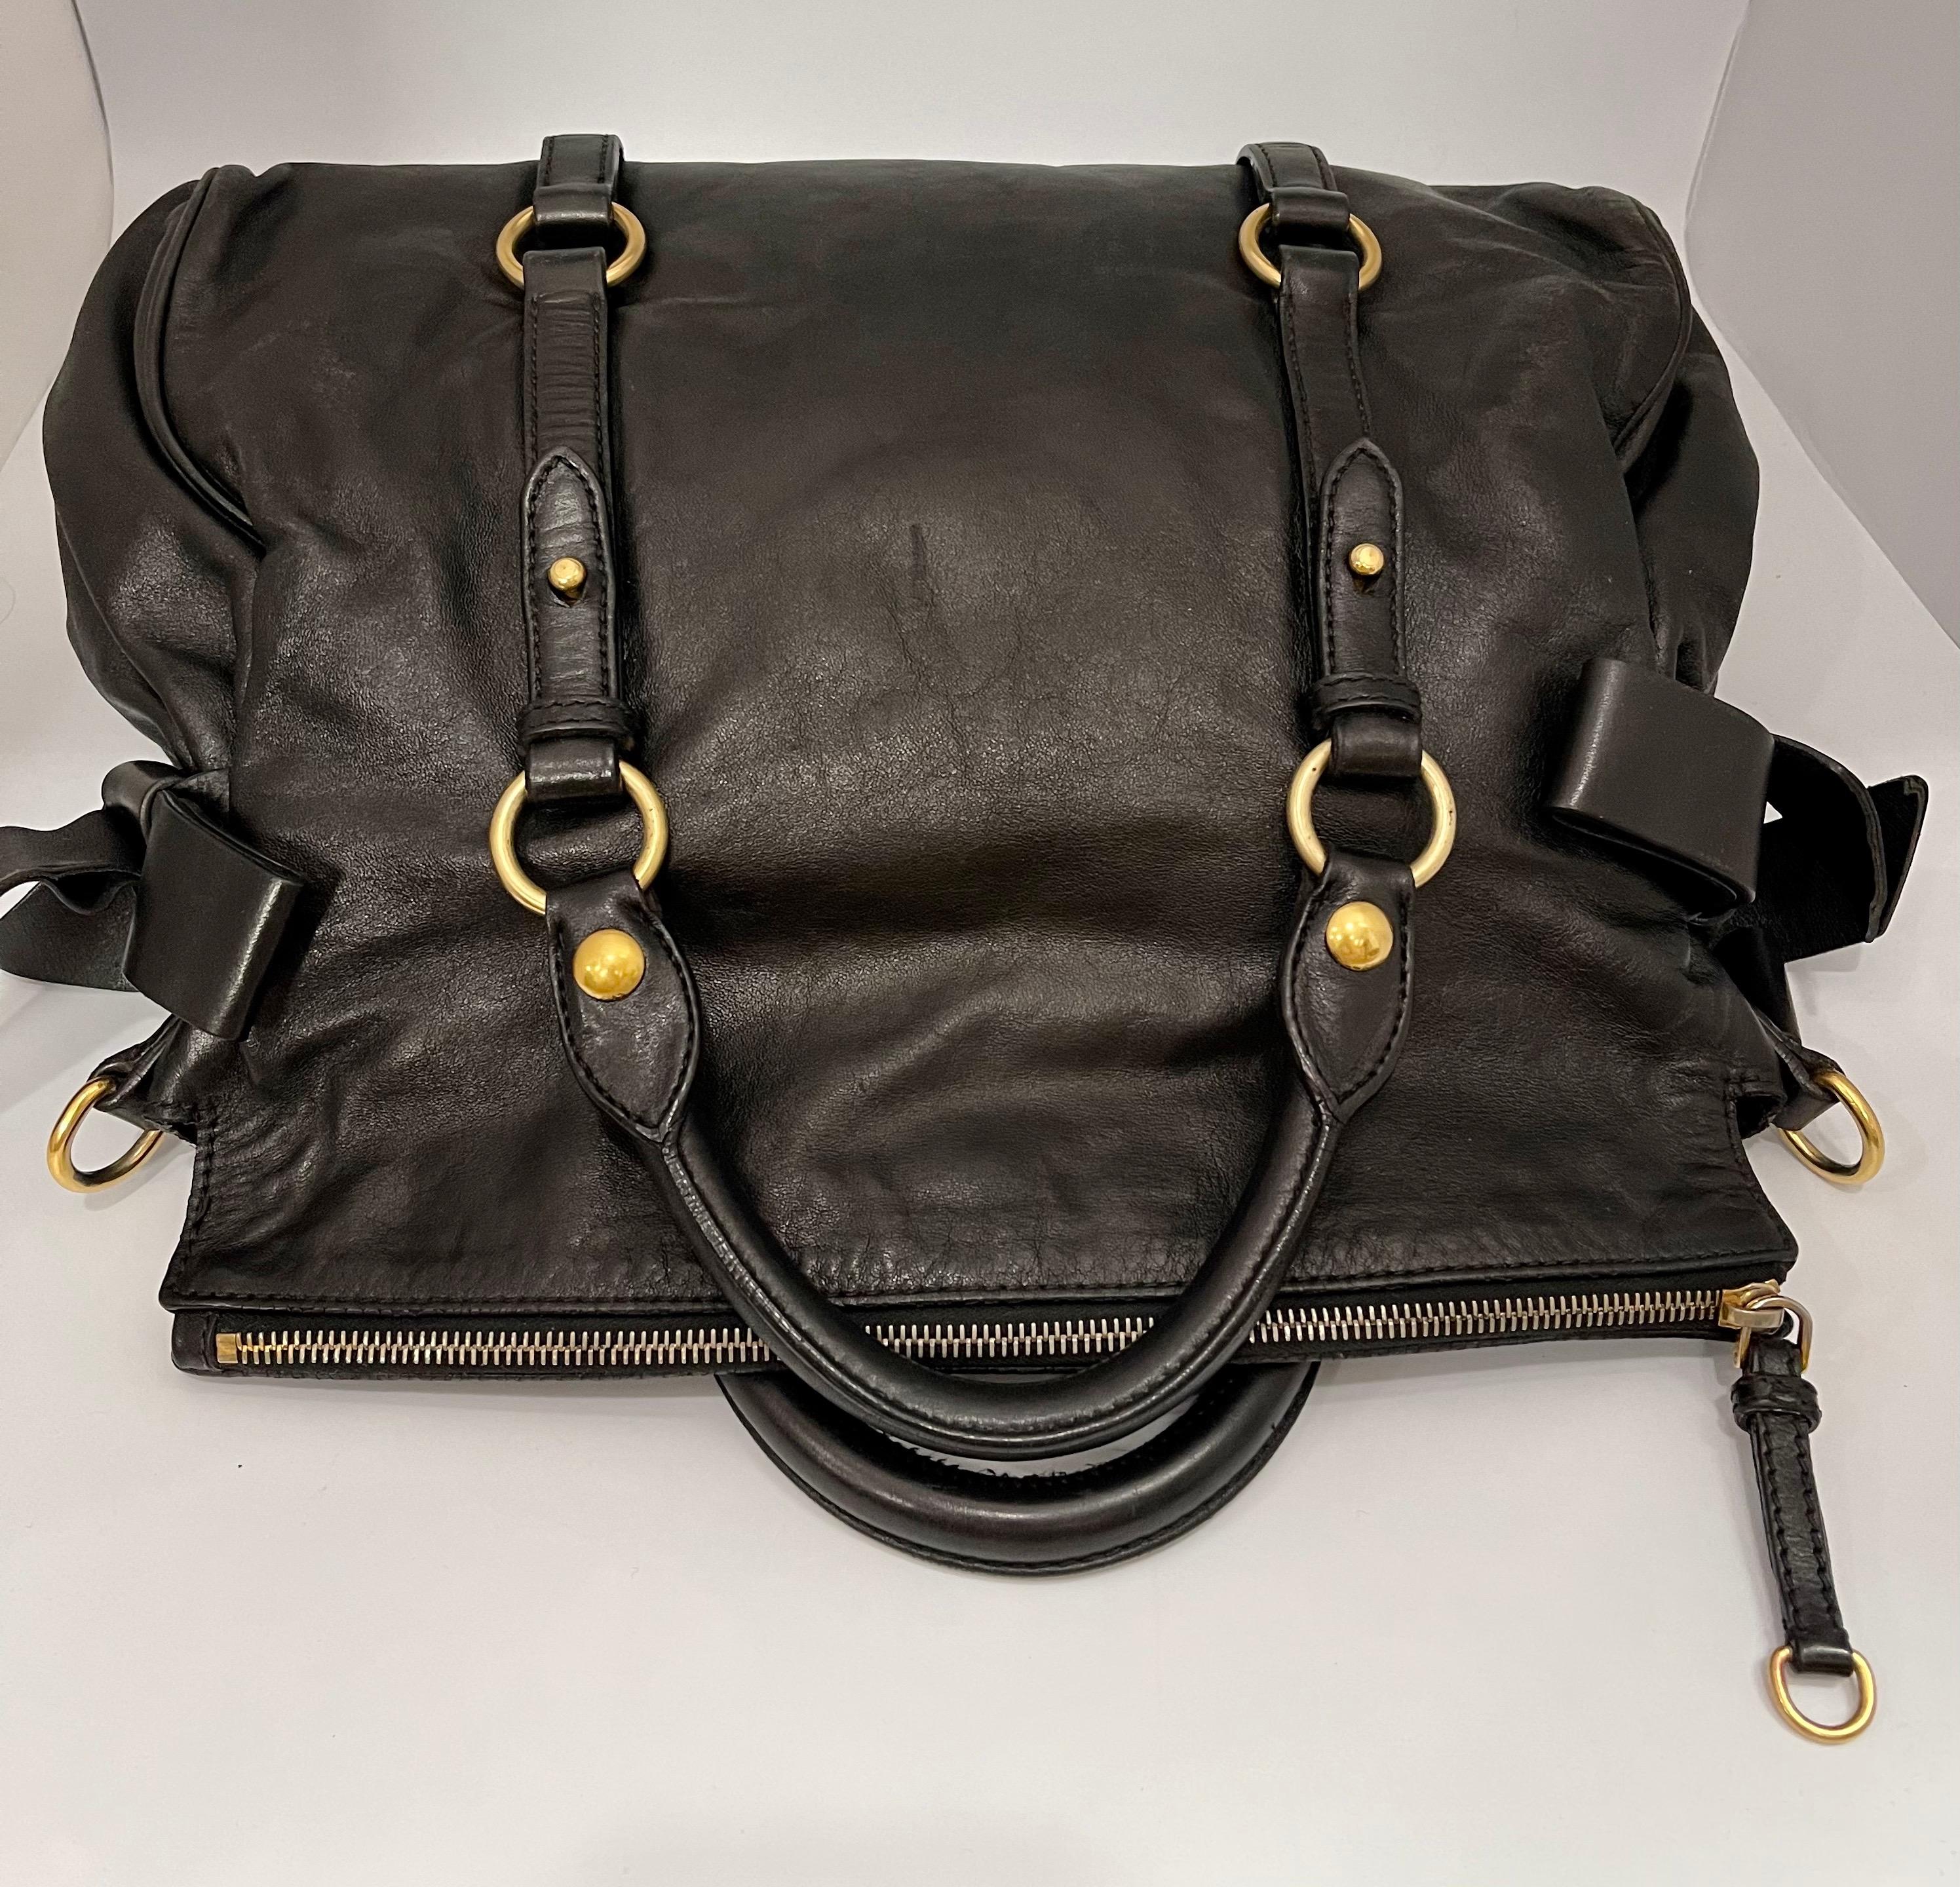 Polished calfskin leather in black with large leather bows on the sides. Rolled leather top handles, an optional shoulder strap, belt embellishment around the girth, and polished brass hardware including large hoop links. The fold-over zip top opens